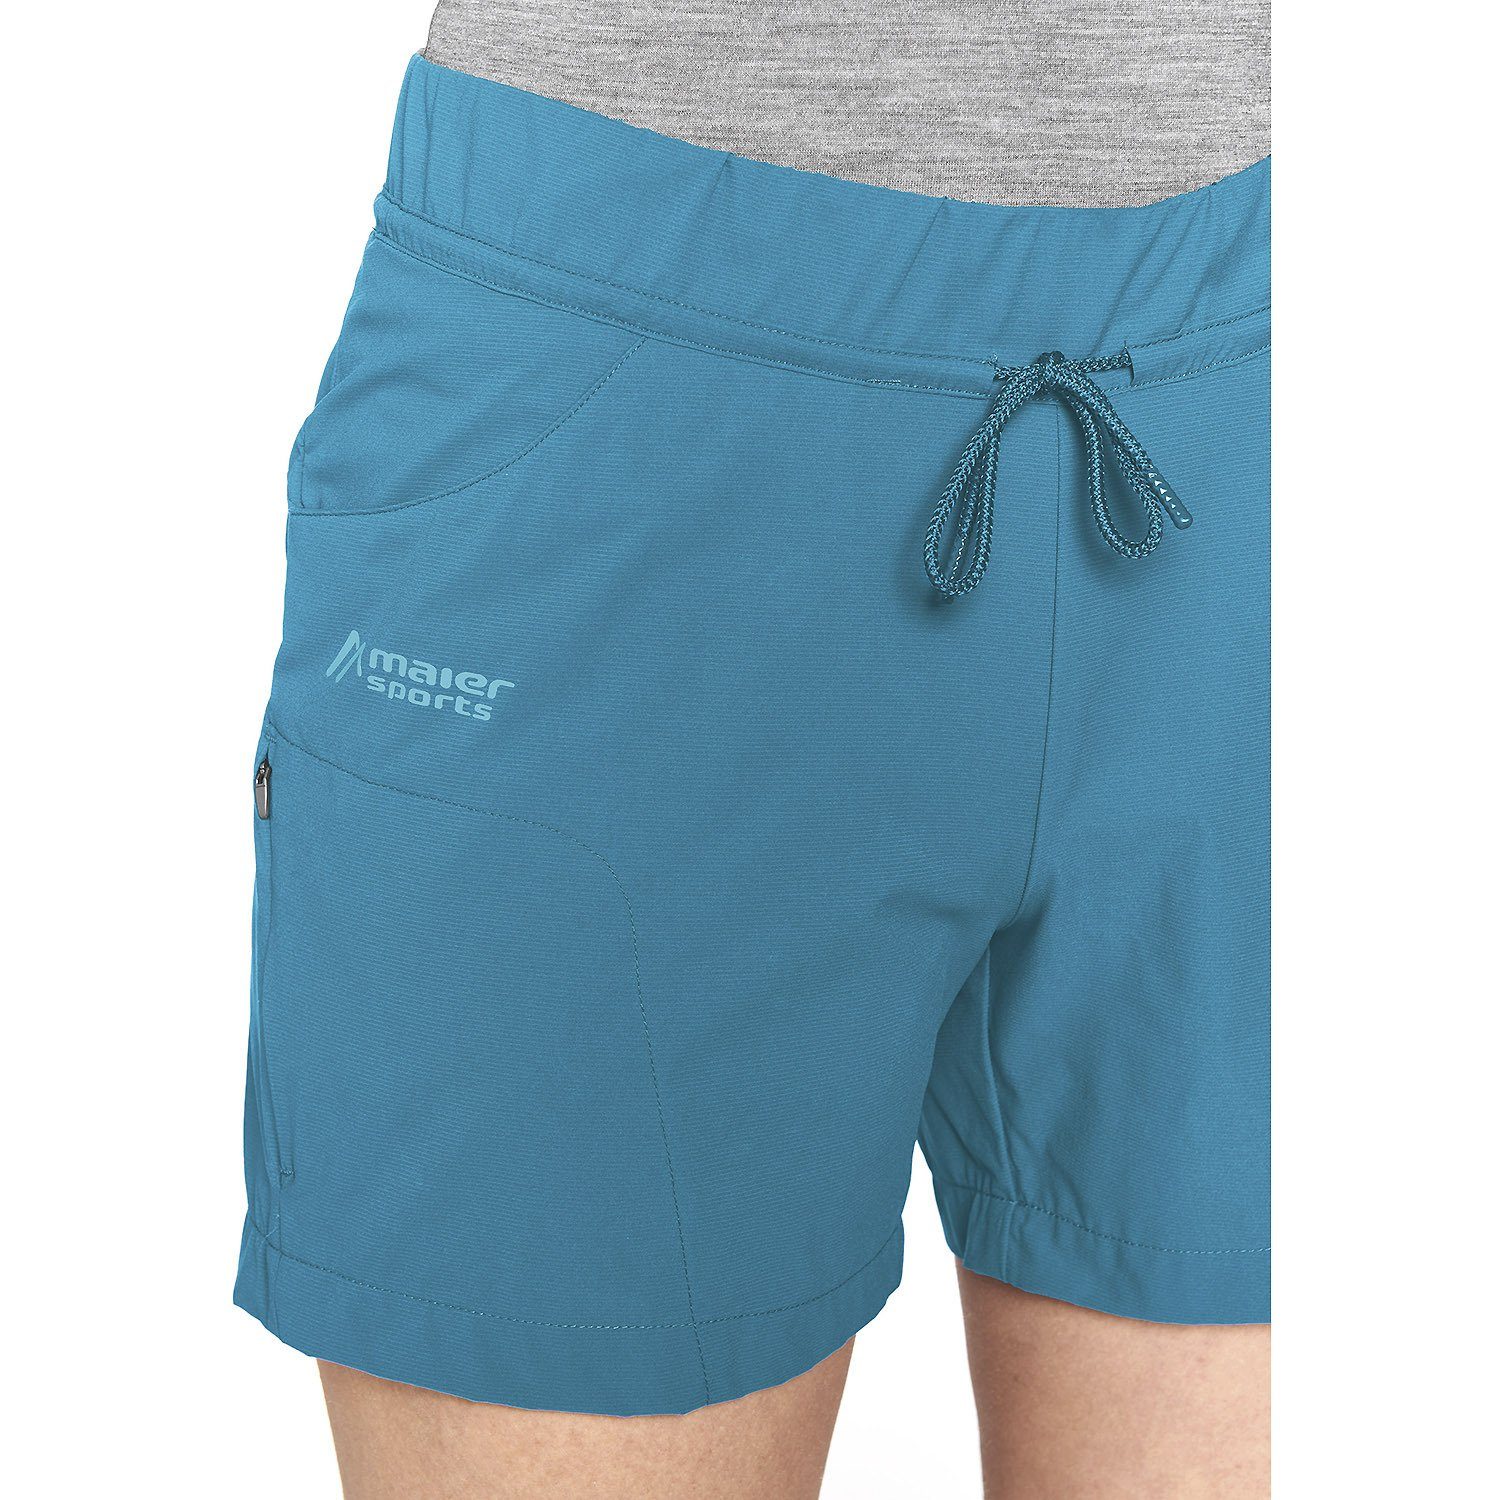 Shorts Sports Petrol Maier Funktionsshorts Fortunit